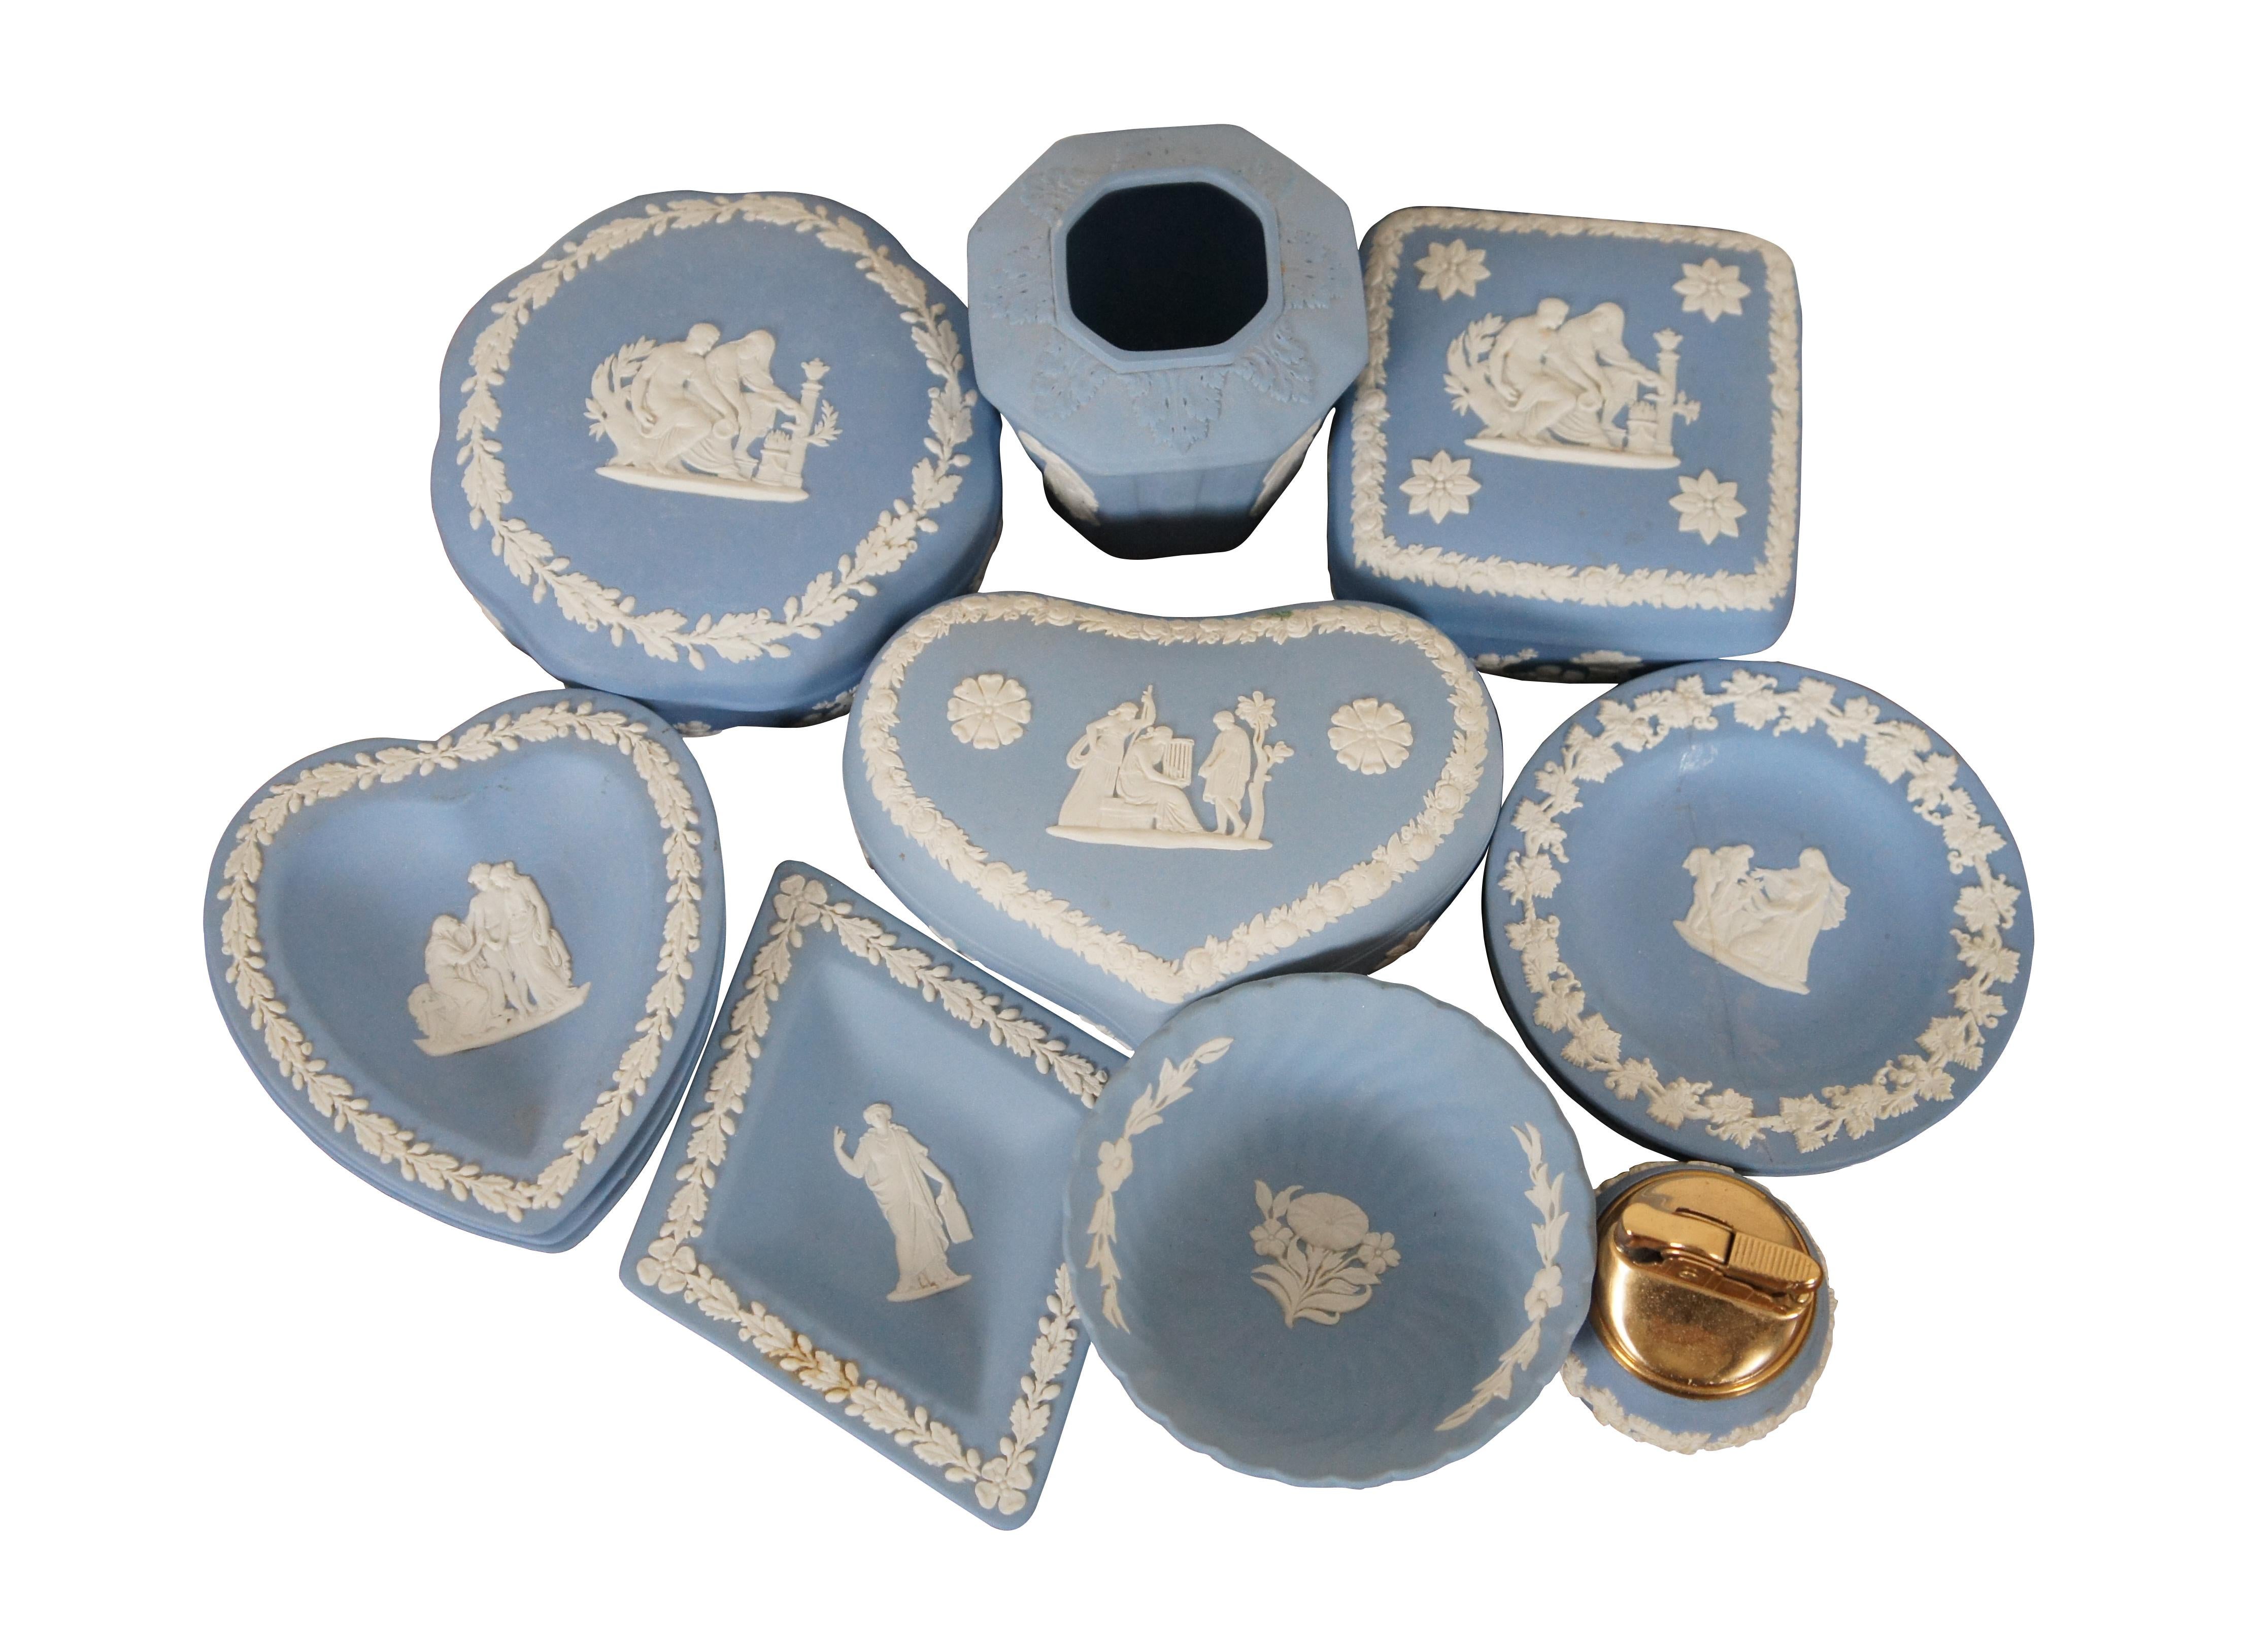 Lot of thirteen pieces of Wedgwood cream on lavender (light blue) Jasperware. Set includes a round scalloped trinket box, square trinket box, heart trinket box, table lighter, bud vase, diamond dish, round swirl bowl, 3 round dishes, and 3 heart